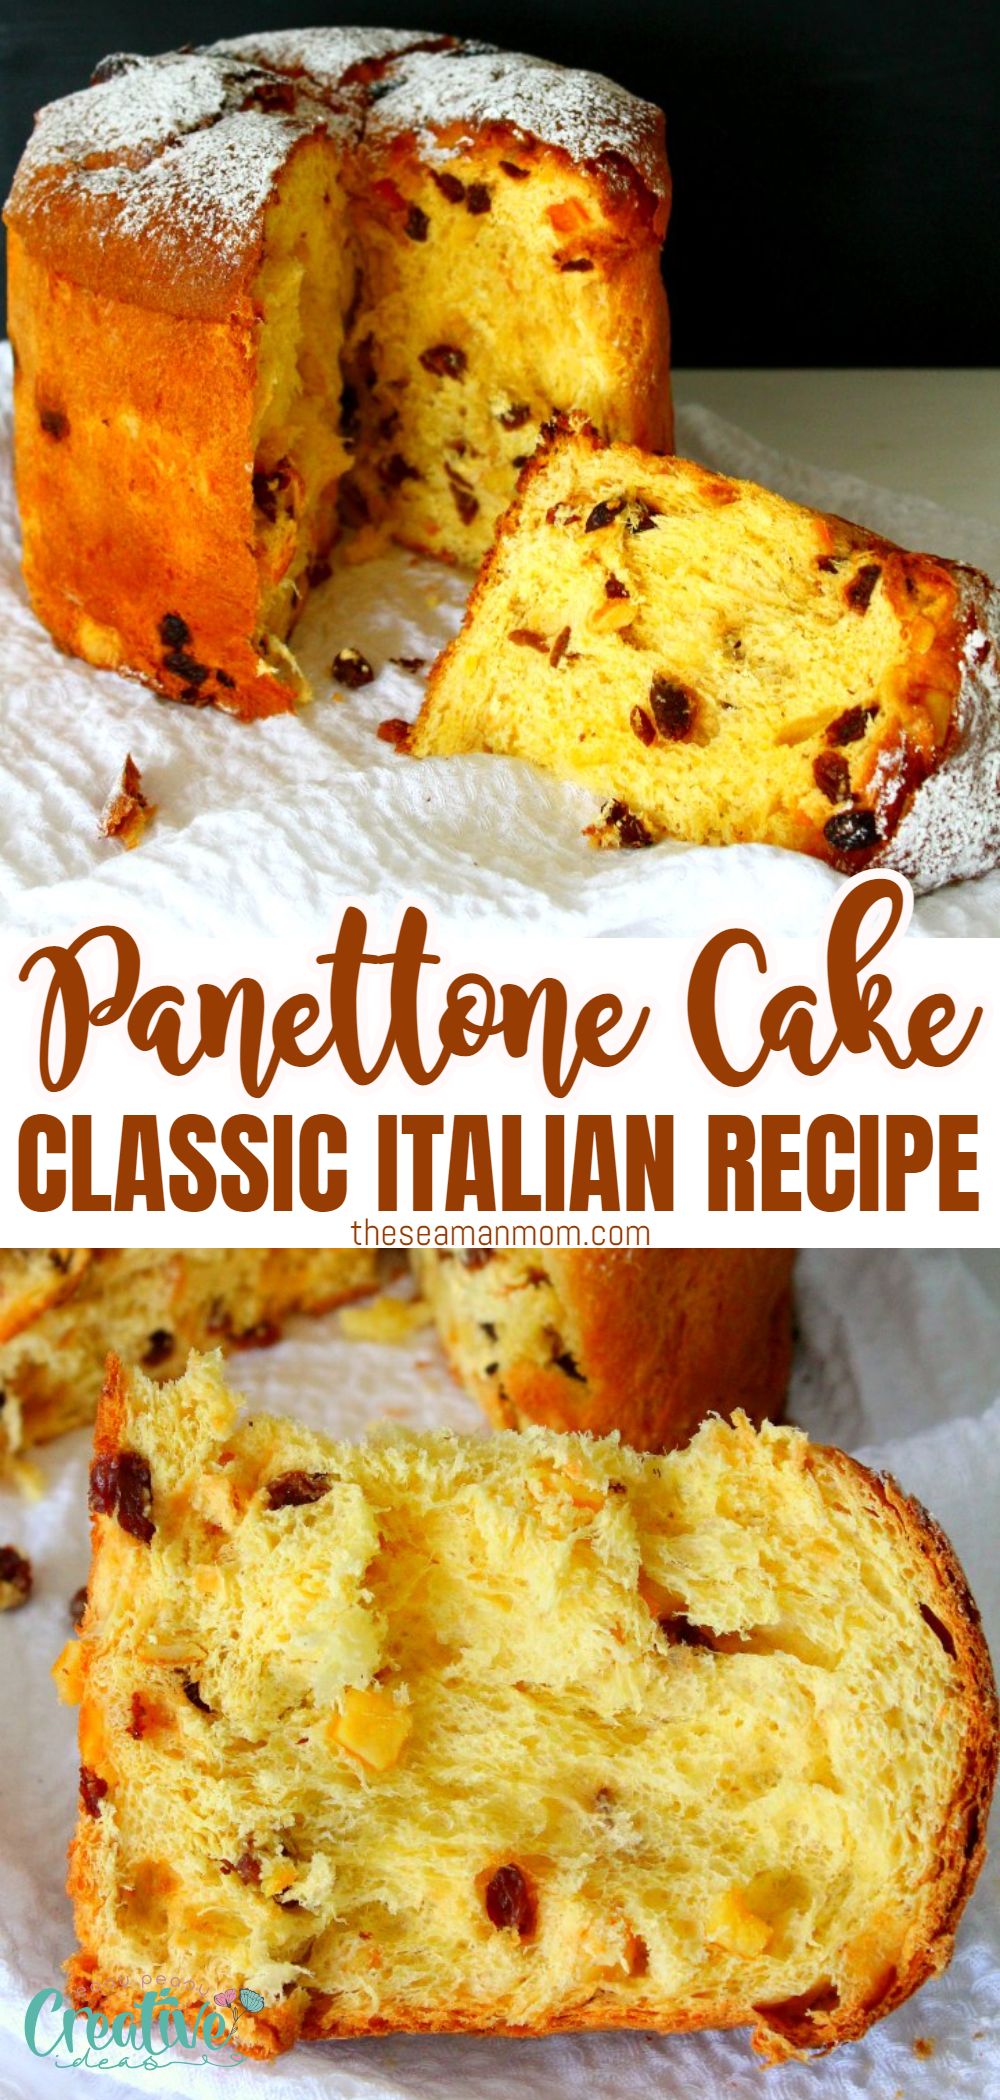 This traditional Italian Panettone Recipe was originally a Christmas sweet bread but make Panettone once and you'll want it on your table every single holiday! I promise you, it's that good! via @petroneagu